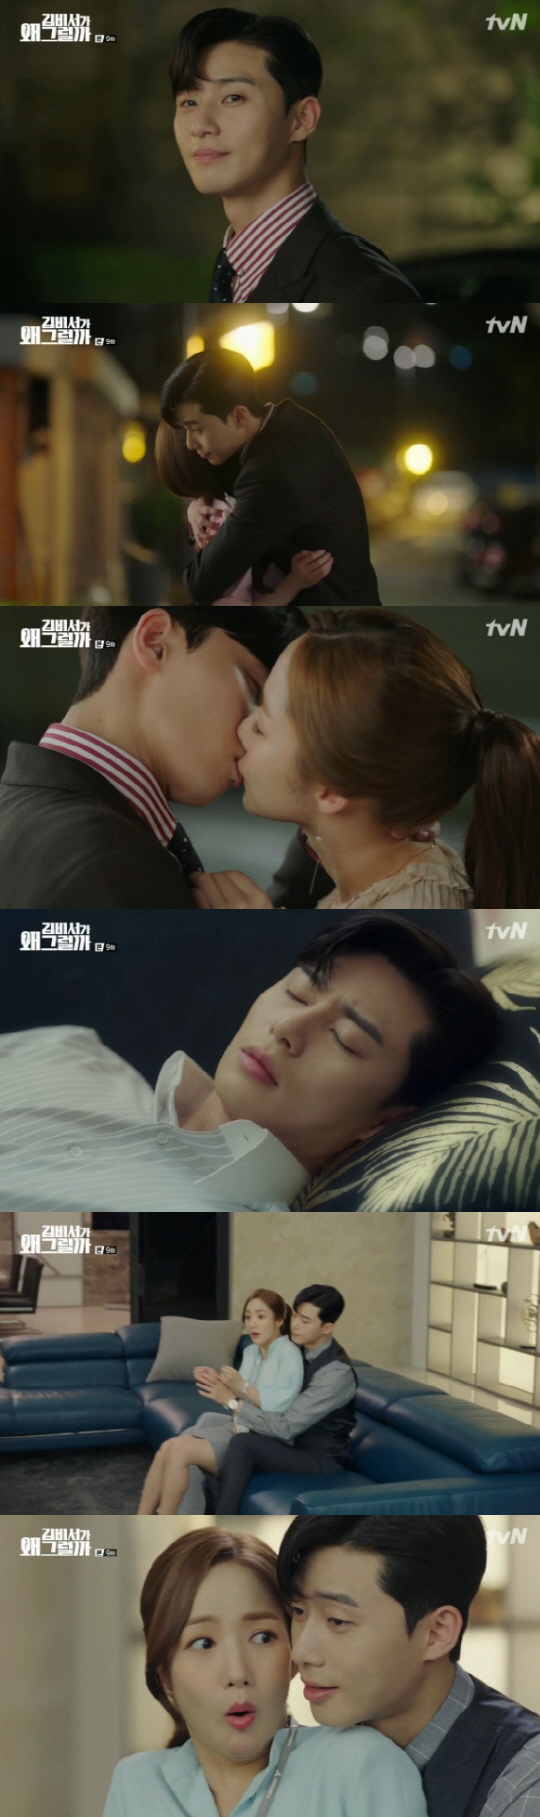 Park Min-young became convinced that his younger brother was Park Seo-joon.In the ninth episode of Why would Secretary Kim do that? on the 4th, Lee Yeongjun (Park Seo-joon) confirmed each others hearts through kisses.Lee Yeongjun asked, Id better make sure - were going to clean up, right?Kim Mi-so replied, Yes, and Lee Yeongjun said, I think its a quiz program MC. What is so hard?As Kim Mi-so walked quickly, she quipped, Come on, lets go, my girl!Lee Yeongjun then says, I dont want to break up, I have great ability and appearance, so come and marry me.Kim Mi-so said, I have only been dating for an hour, but it looks like a proposal. It is too hasty.Kim Mi-so, who came to work the next day, looked at Lee Yeongjun who was asleep on the sofa and covered the blanket, but suddenly Lee Yeongjun woke up and took Kim Mi-sos hand.Lee Yeongjun put Kim Mi-so on his lap.Lee Yeongjun said, If you wake up Blow-Up who has fallen asleep, you should take this. I am sorry, I will not control the speed of running now.Kim Mi-so is surprised to say, Blow-Up is how to say that. But I do not think it hurts anywhere, but I think you are sleeping a lot nowadays.Lee Yeongjun grins, saying, Do not worry.In addition, Lee Yeongjun did his own things to the smile of Kim Secretary when he was usually given a break to his lover smile.In response, the staff of the affiliated offices, including the head of the politician (Lee Yu-jun) and the head of the department, Hwang Bo Ra, were astonished as if they had seen ghosts.Lee Yeongjun tried to reveal the aspect of the lover without knowing others, but the employees who wondered about it continued.After all, Kim Mi-so tells Lee Yeongjun, Because its what Ive done for nine years, so please let me continue to do it. Lee Yeongjun said, Kim, I know what you mean.But I do not want to do that to Kim. Kim Mi-so said, I felt Pride when I saw my boss who was satisfied with such a thing, but I think that what you just said is not respected.Lee Yeongjun said, I am sad. Do you think it would have been easy to support someone? I wanted to be good to Kim.Kim Mi-so said, But dont do that in the future. This is where we work, this is our work hours. We need to draw the lines between Kim and Kim Mi-so.Please understand, he said, leaving the vice chairmans office.Lee Yeongjun, who is left alone, says, Kim is too rational, he says to himself, Why do you feel like it is all right?Two people in conflict for the first time since becoming a couple: Lee Yeongjun, after agonizing, packs up Kim Mi-sos favorite shells and pupa and goes home.My girlfriends taste is unique. So Kim Mi-so thanks me for coming. I missed you so much.Lee Yeongjun asked, Why is it rational in the company? Kim Mi-so said, I tried to draw a line more than usual because I was a company.I am sorry for making you sad, and Lee Yeongjun smiled as if satisfied.But suddenly Lee Yeongjun asked, I dont like the title, I call you brother, Ill call you smile, and Kim Mi-so poured out his drink.In the end, Kim Mi-so promises to name his brother the following.At this point, the sisters of the smile rang the doorbell, and Kim Mi-so hides Lee Yeongjun in the closet.The sisters, who didnt know there was Lee Yeongjun in the closet, excited his back-to-back conversation.After sending his sisters, Kim Mi-so hurriedly opened his closet. Waiting for him was an angry Lee Yeongjun.He said, I did not talk about a date on the blockbuster scale, but I just ate it. And was I selfish? Would I have bought pig shells and insects?But Lee Yeongjun seemed to fall in love properly; he soon said, What if I fight this? Ive managed to reconcile.I can not get angry because I am so pretty. The two of them kissed the reconciliation in the closet.Kim Mi-so also meets Lee Tae-hwan with Lee Yeongjuns permission.Lee Sung-yeon said, I am sorry that I was Confessions at that time. Kim Mi-so draws a line saying, I did not meet my brother with the heart of reason.Then Lee Sung-yeon asked, Is it because of Lee Yeongjun?Lee Yeongjun appears at this time and If you say this in front of a smile again, I will not look at your family at that time. Lets go.On the other hand, Kim Mi-so was convinced that his brother was Lee Yeongjun.So far, Kim Mi-so has known his brother Lee Sung-yeon (Lee Tae-hwan).However, Kim Mi-so has doubts about Lee Sung-yeons ankle and cold side without scarring.In addition, the details Choi had mentioned were consistent with what Lee Yeongjun had mentioned, and it reminds me that his brothers name, which he had called as a child, was Lee Sung-hyun, not Lee Sung-yeon.So Kim Mi-so asked Lee Yeongjun, Sung Hyun Brother? While he was asleep in the car for a while. Lee Yeongjun is surprised to open his eyes Why.